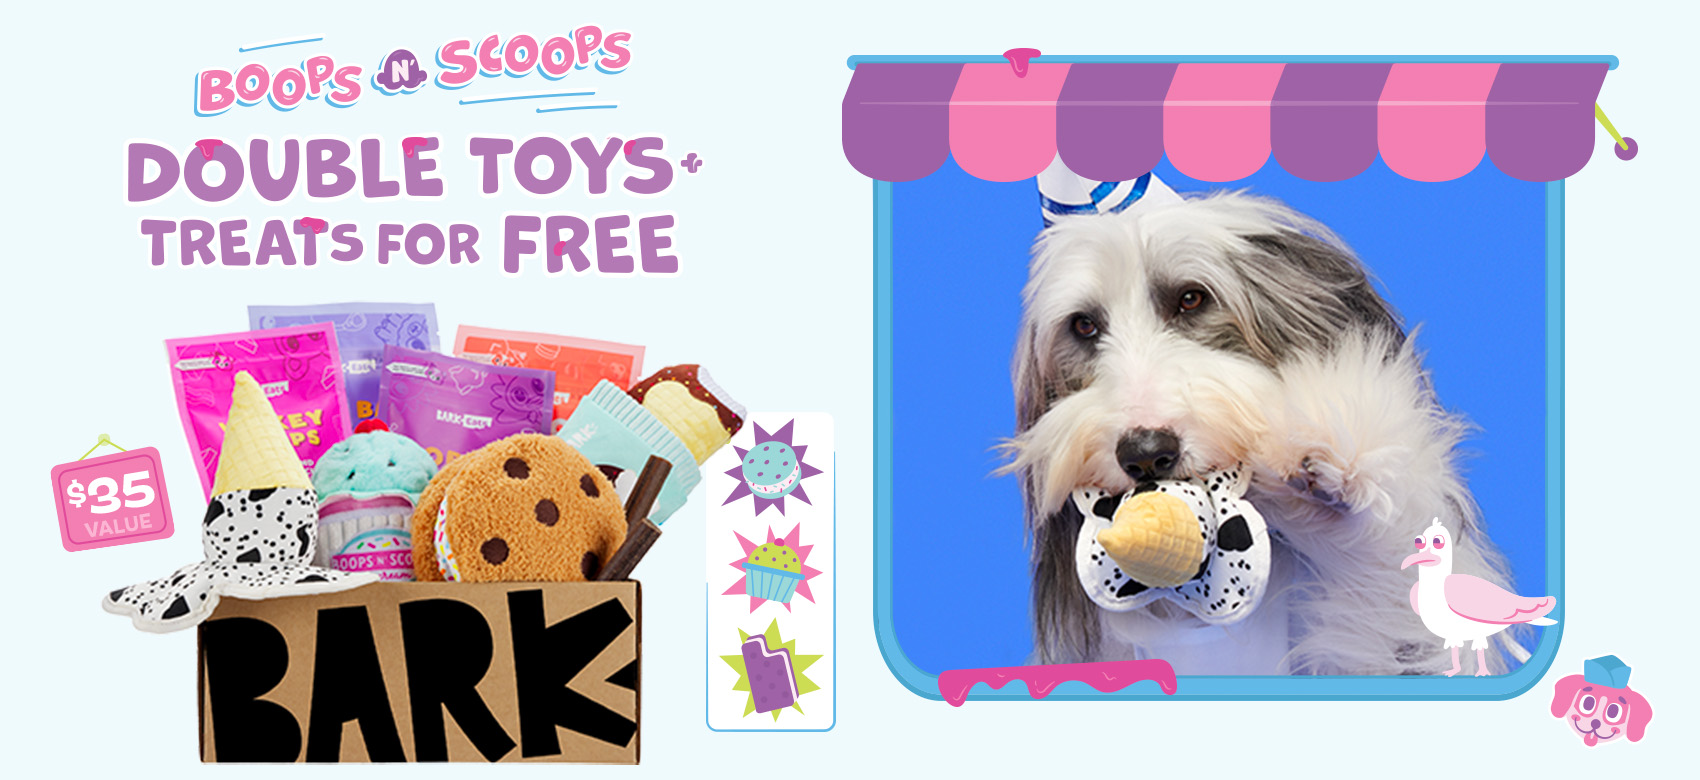 Boops n' Scoops - Double the toys & treats for free